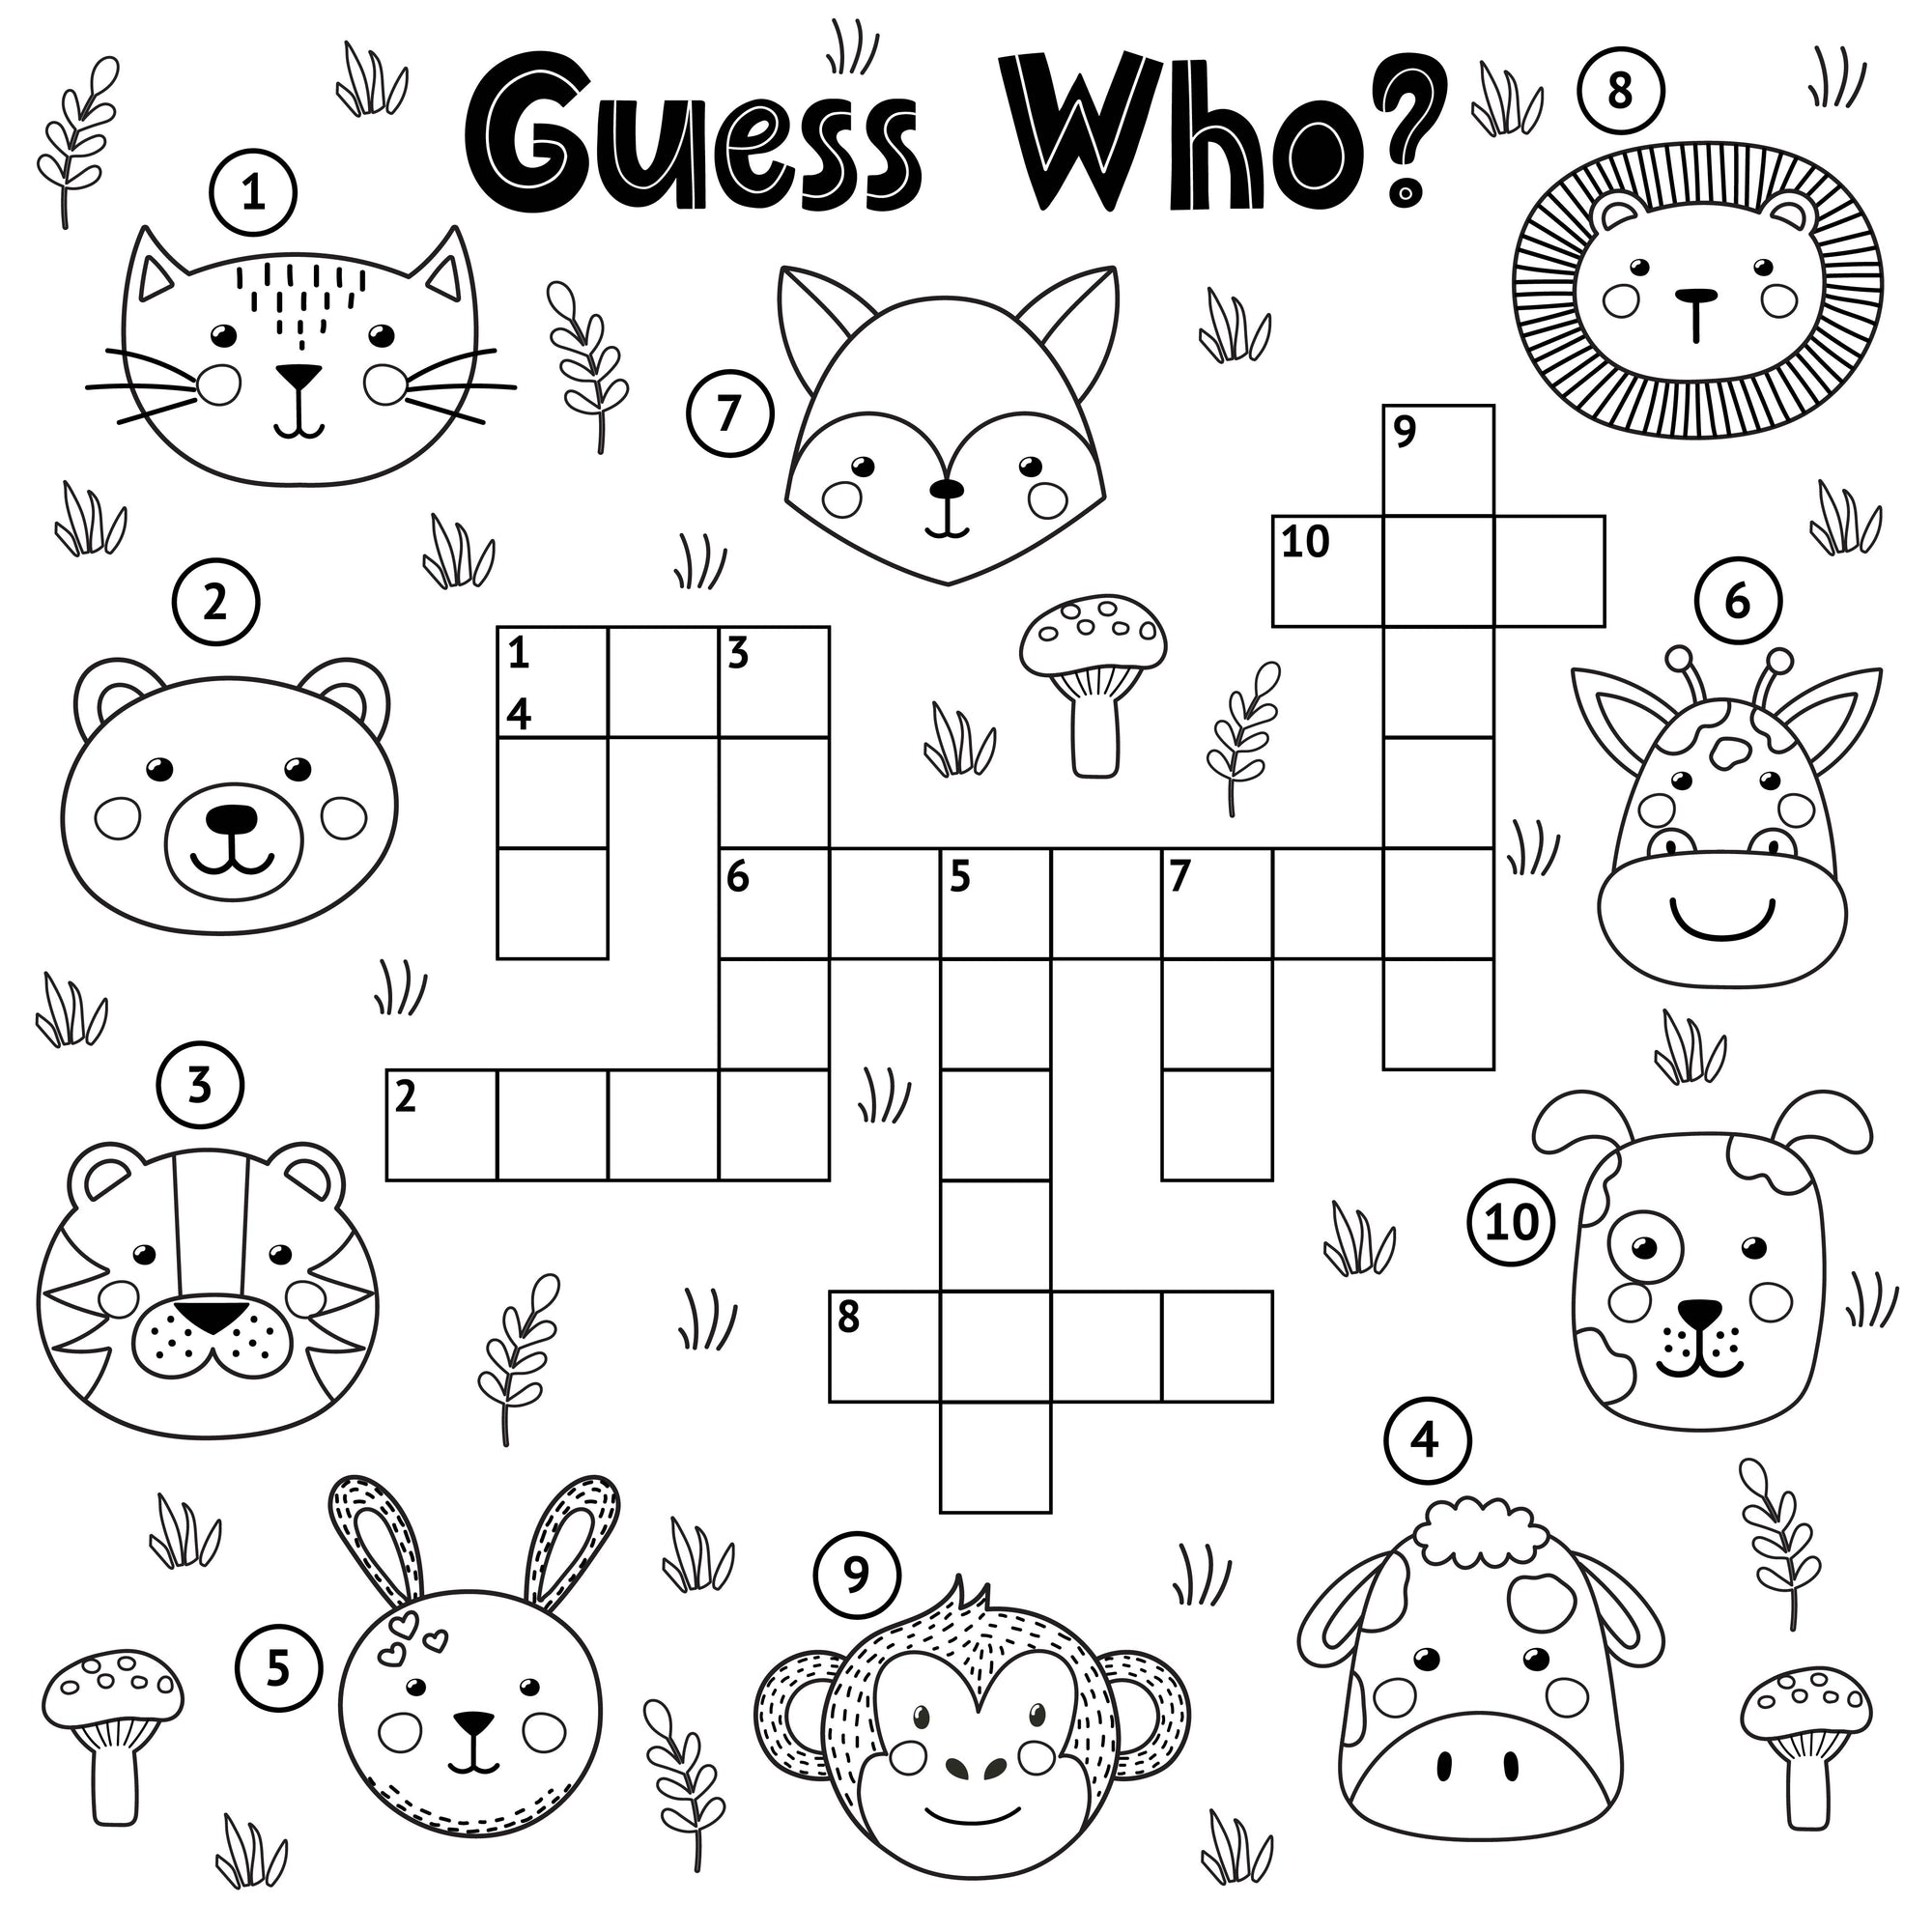 Guess Who? Colouring-in Crossword PDF Download